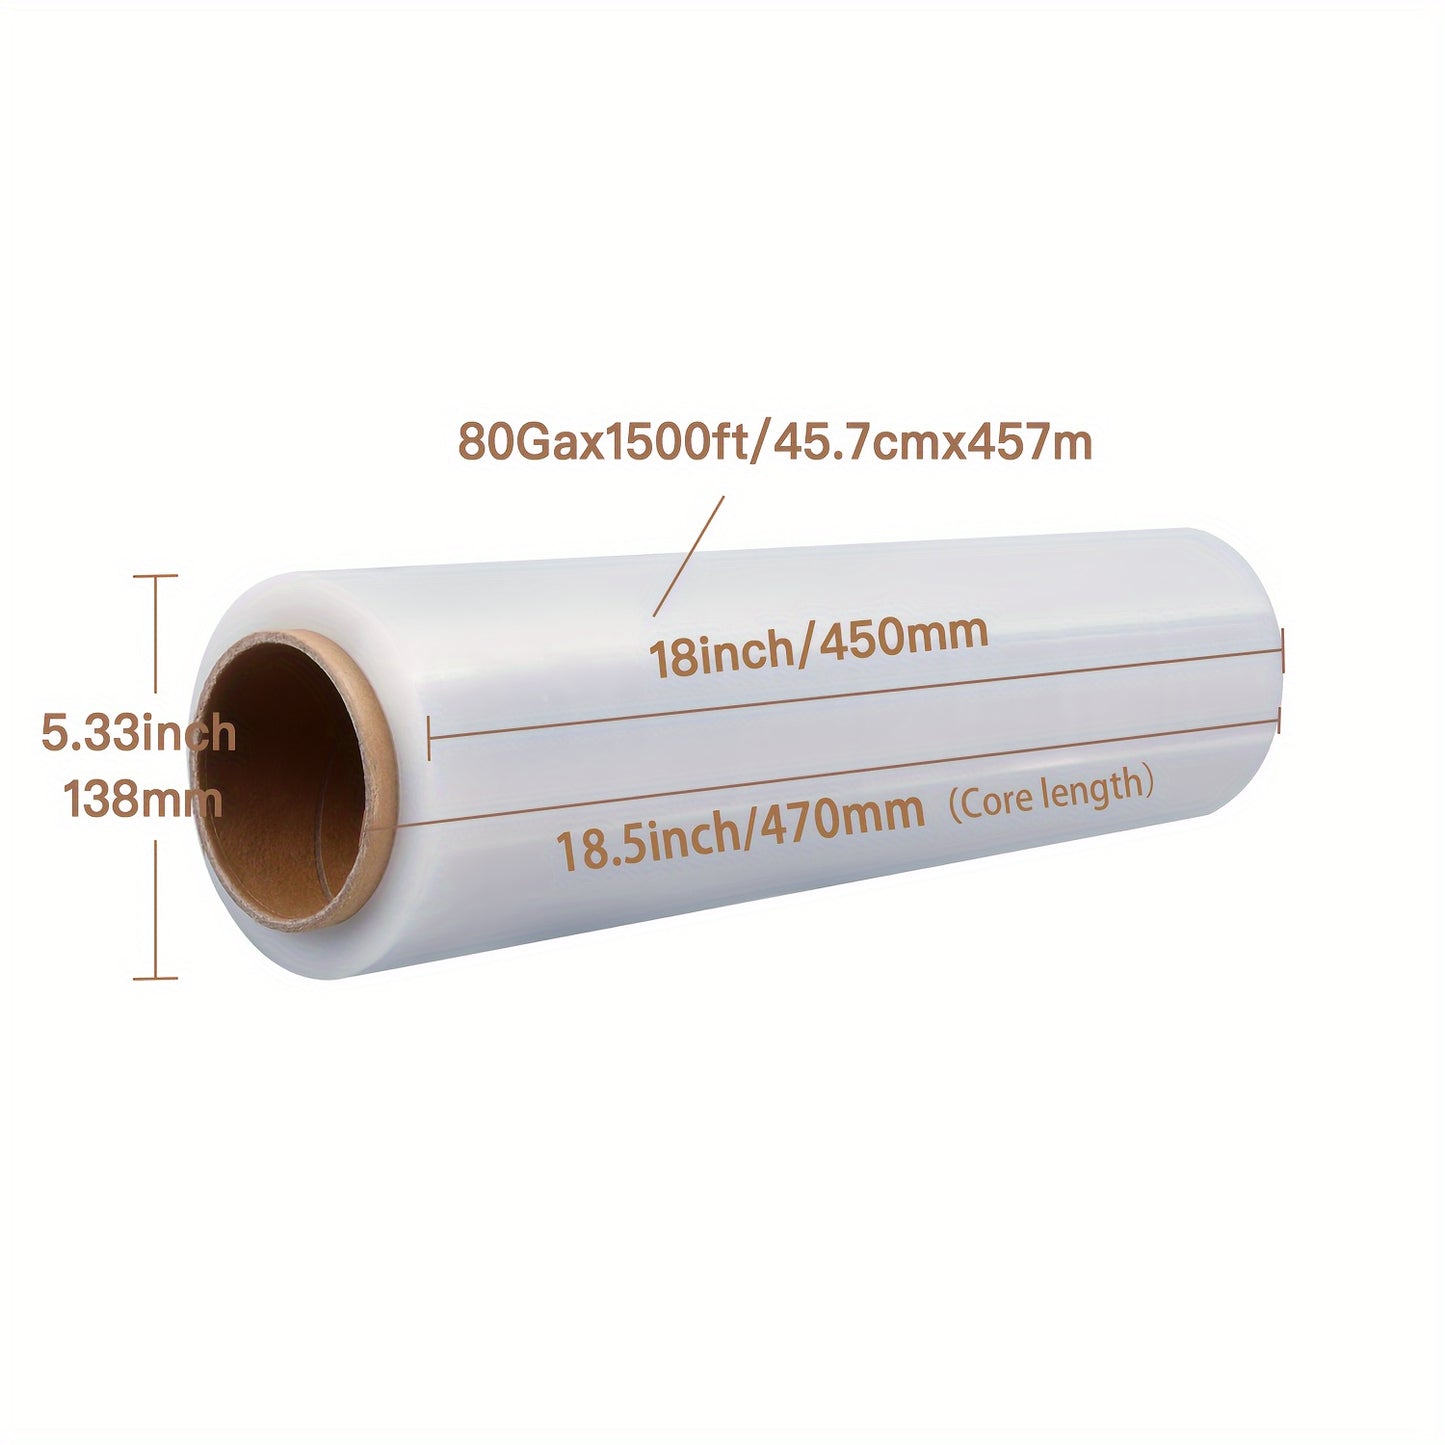 18Inch Stretch Wrap - 1500 Feet 80 Gauge, 1 Roll of Clear Plastic Self-Adhering Stretch Wrap Film for Pallet Wrapping, Thick and Durable Packaging for Moving Supplies Heavy-Duty Shrink Film